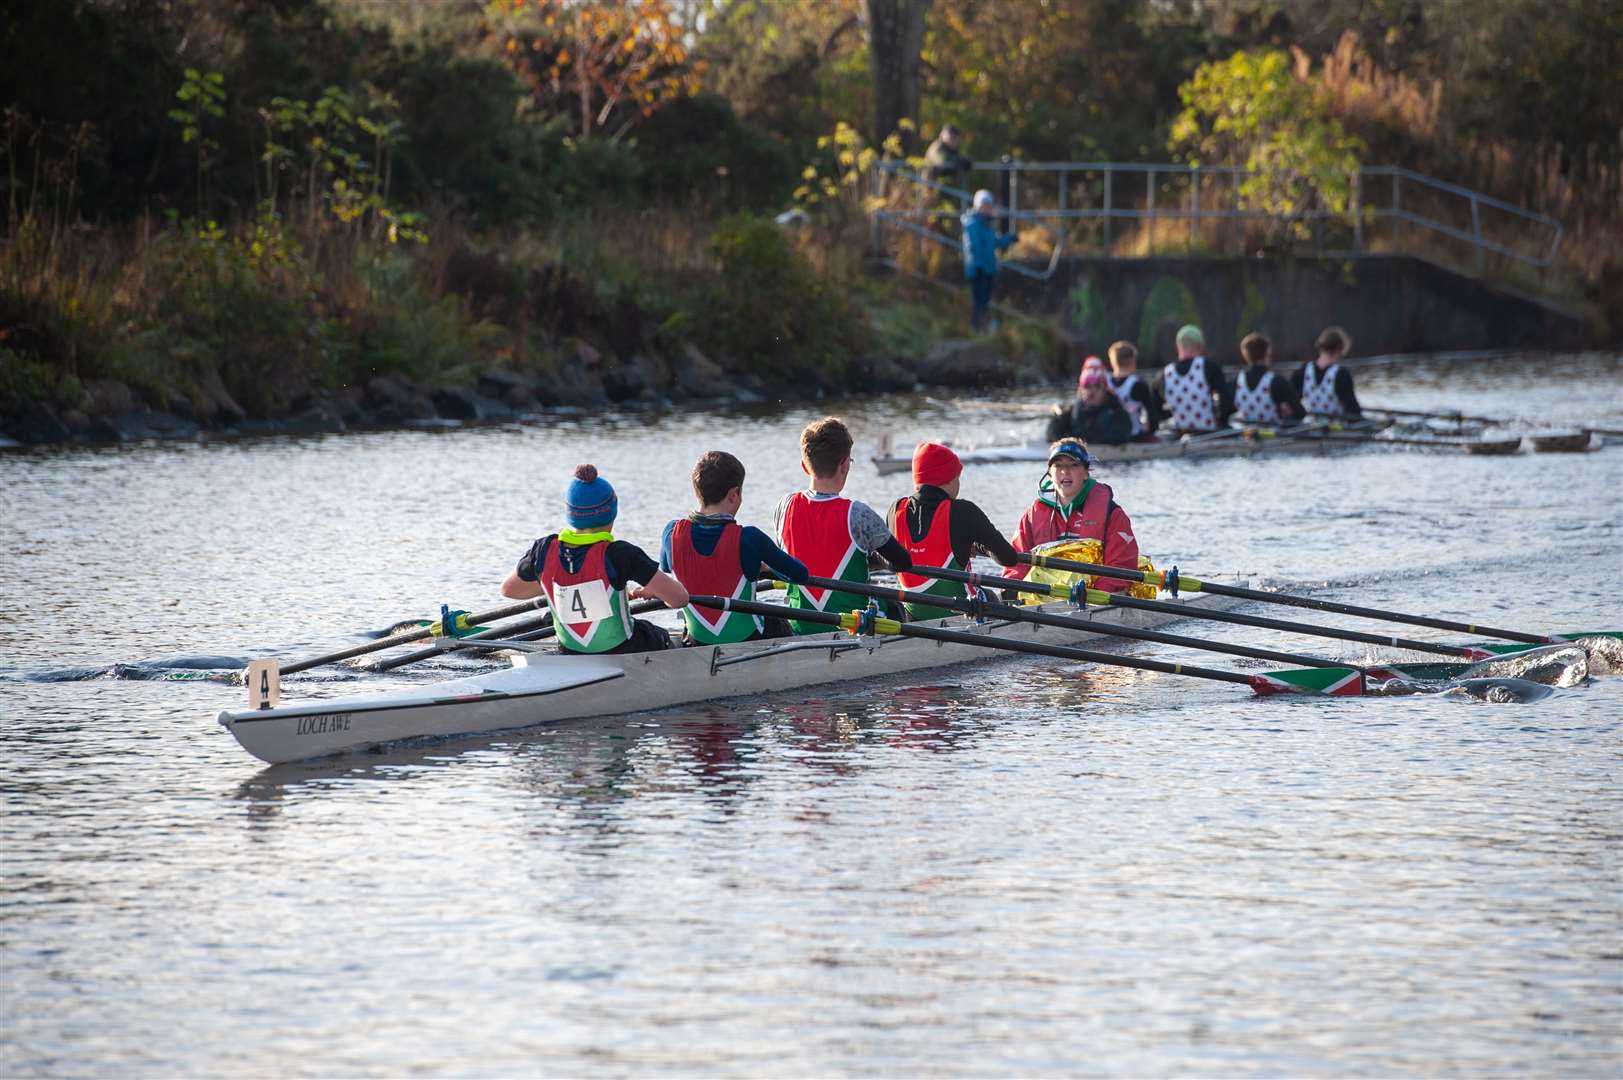 Inverness Rowing Club Fours/Quads and Small Boats, Caledonian Canal, Inverness...Inverness Rowing Club - Euan Loynd, James Luke, Harry Ratcliffe, Hamish Grant and Cox Melissa Murray...Picture: Callum Mackay. Image No..